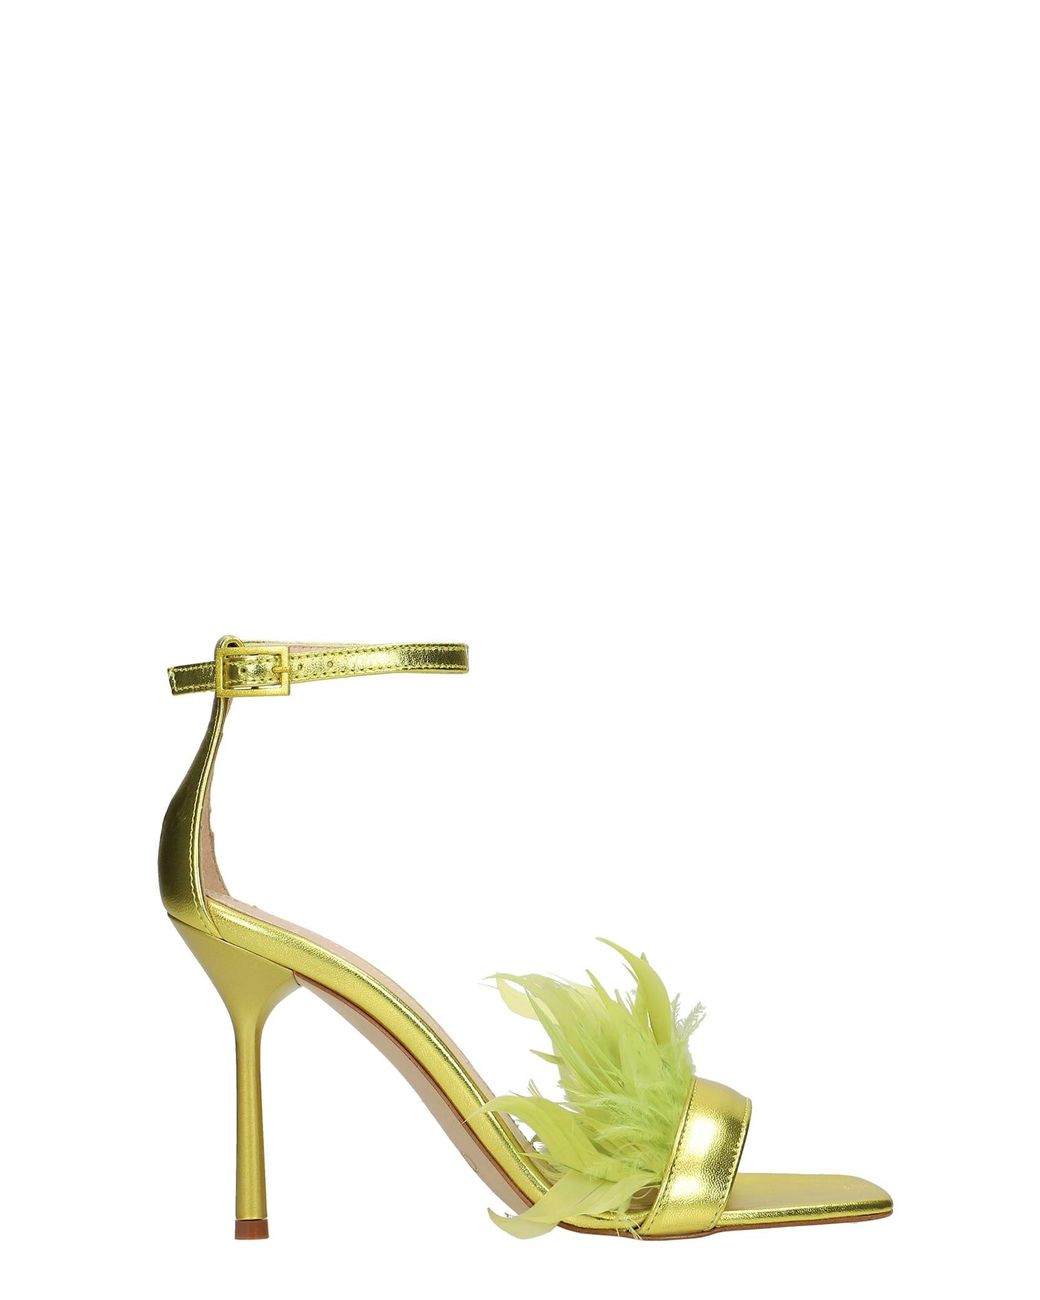 Liu Jo Camelia Lh 02 Sandals In Yellow Leather | Lyst UK